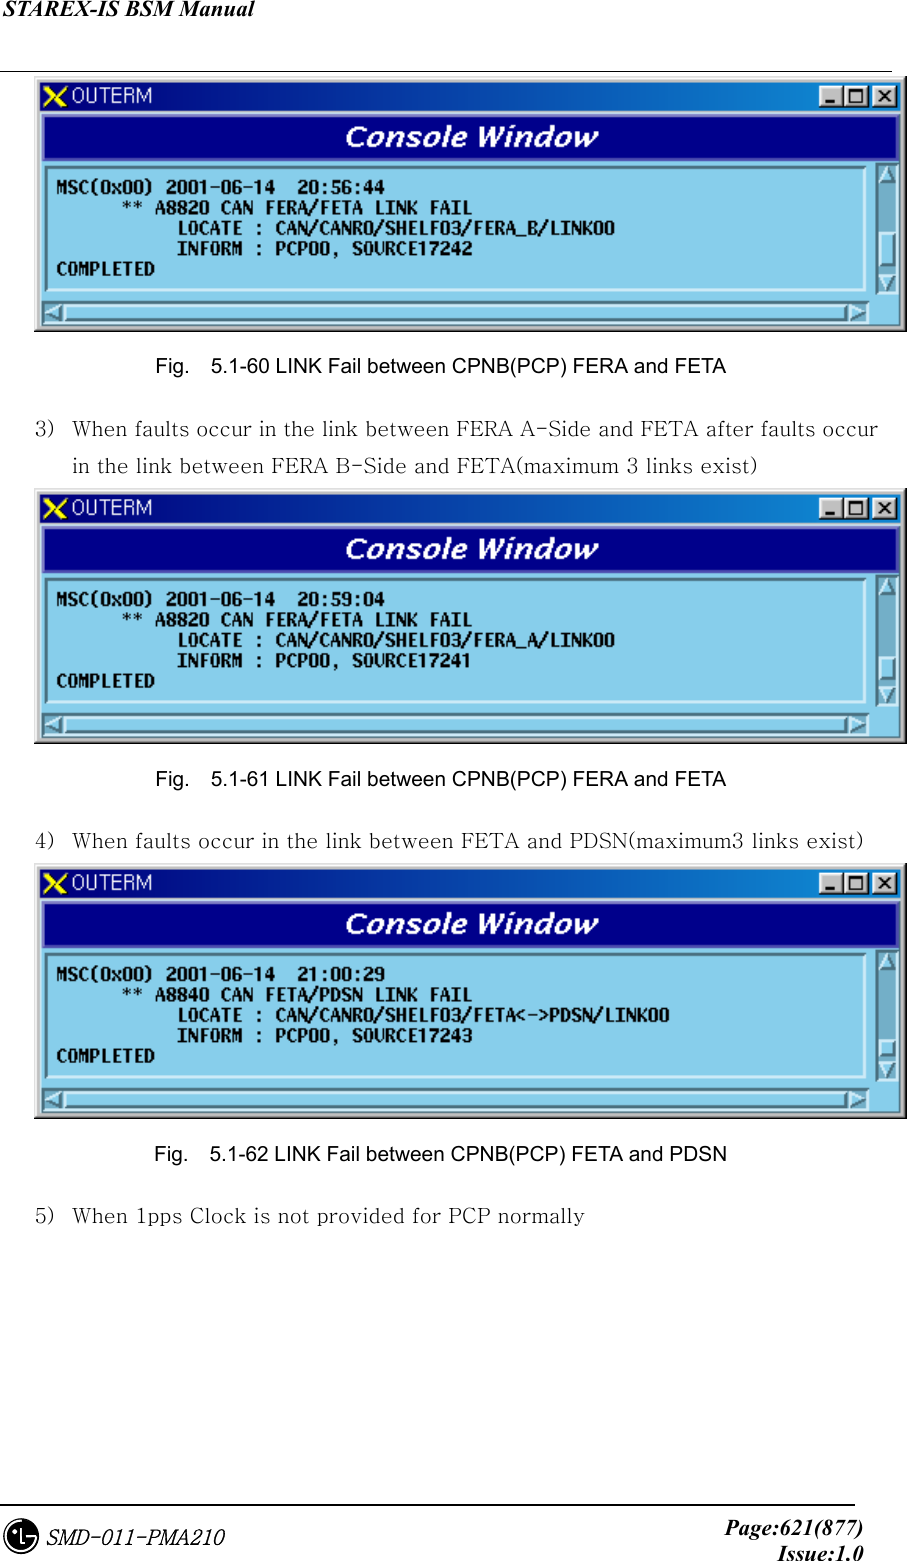 STAREX-IS BSM Manual     Page:621(877)Issue:1.0SMD-011-PMA210  Fig.    5.1-60 LINK Fail between CPNB(PCP) FERA and FETA   3)  When faults occur in the link between FERA A-Side and FETA after faults occur in the link between FERA B-Side and FETA(maximum 3 links exist)  Fig.    5.1-61 LINK Fail between CPNB(PCP) FERA and FETA 4)  When faults occur in the link between FETA and PDSN(maximum3 links exist)  Fig.    5.1-62 LINK Fail between CPNB(PCP) FETA and PDSN   5)  When 1pps Clock is not provided for PCP normally 